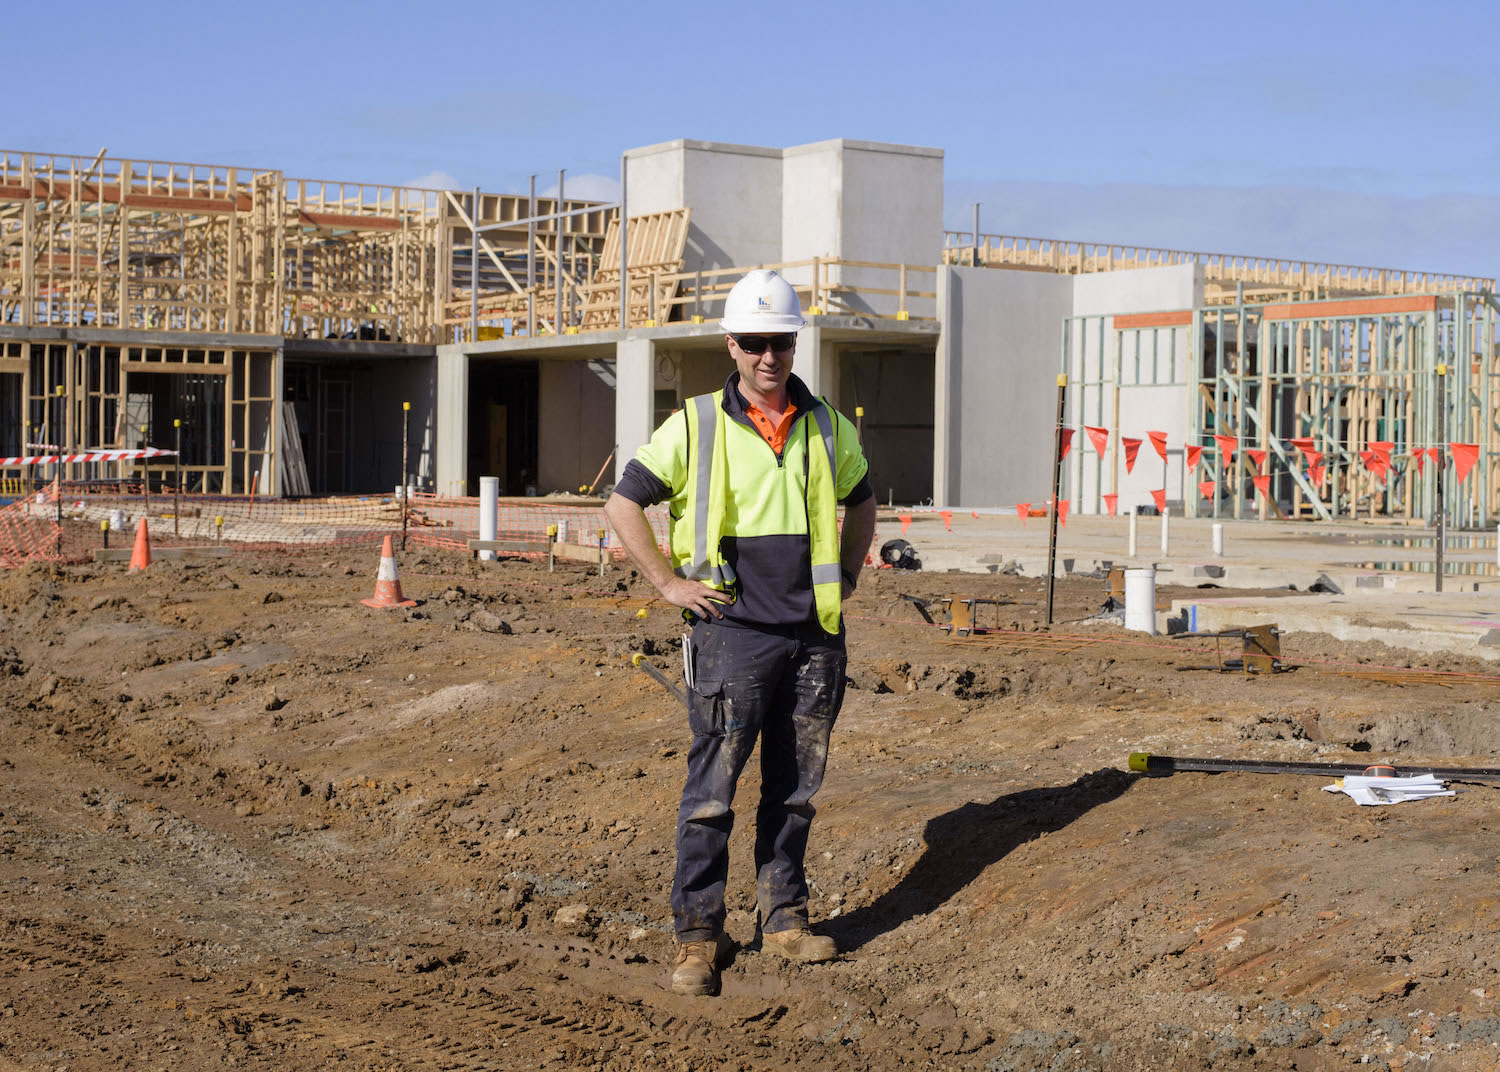 CAREERS IN BUILDING & CONSTRUCTION: SITE FOREMAN